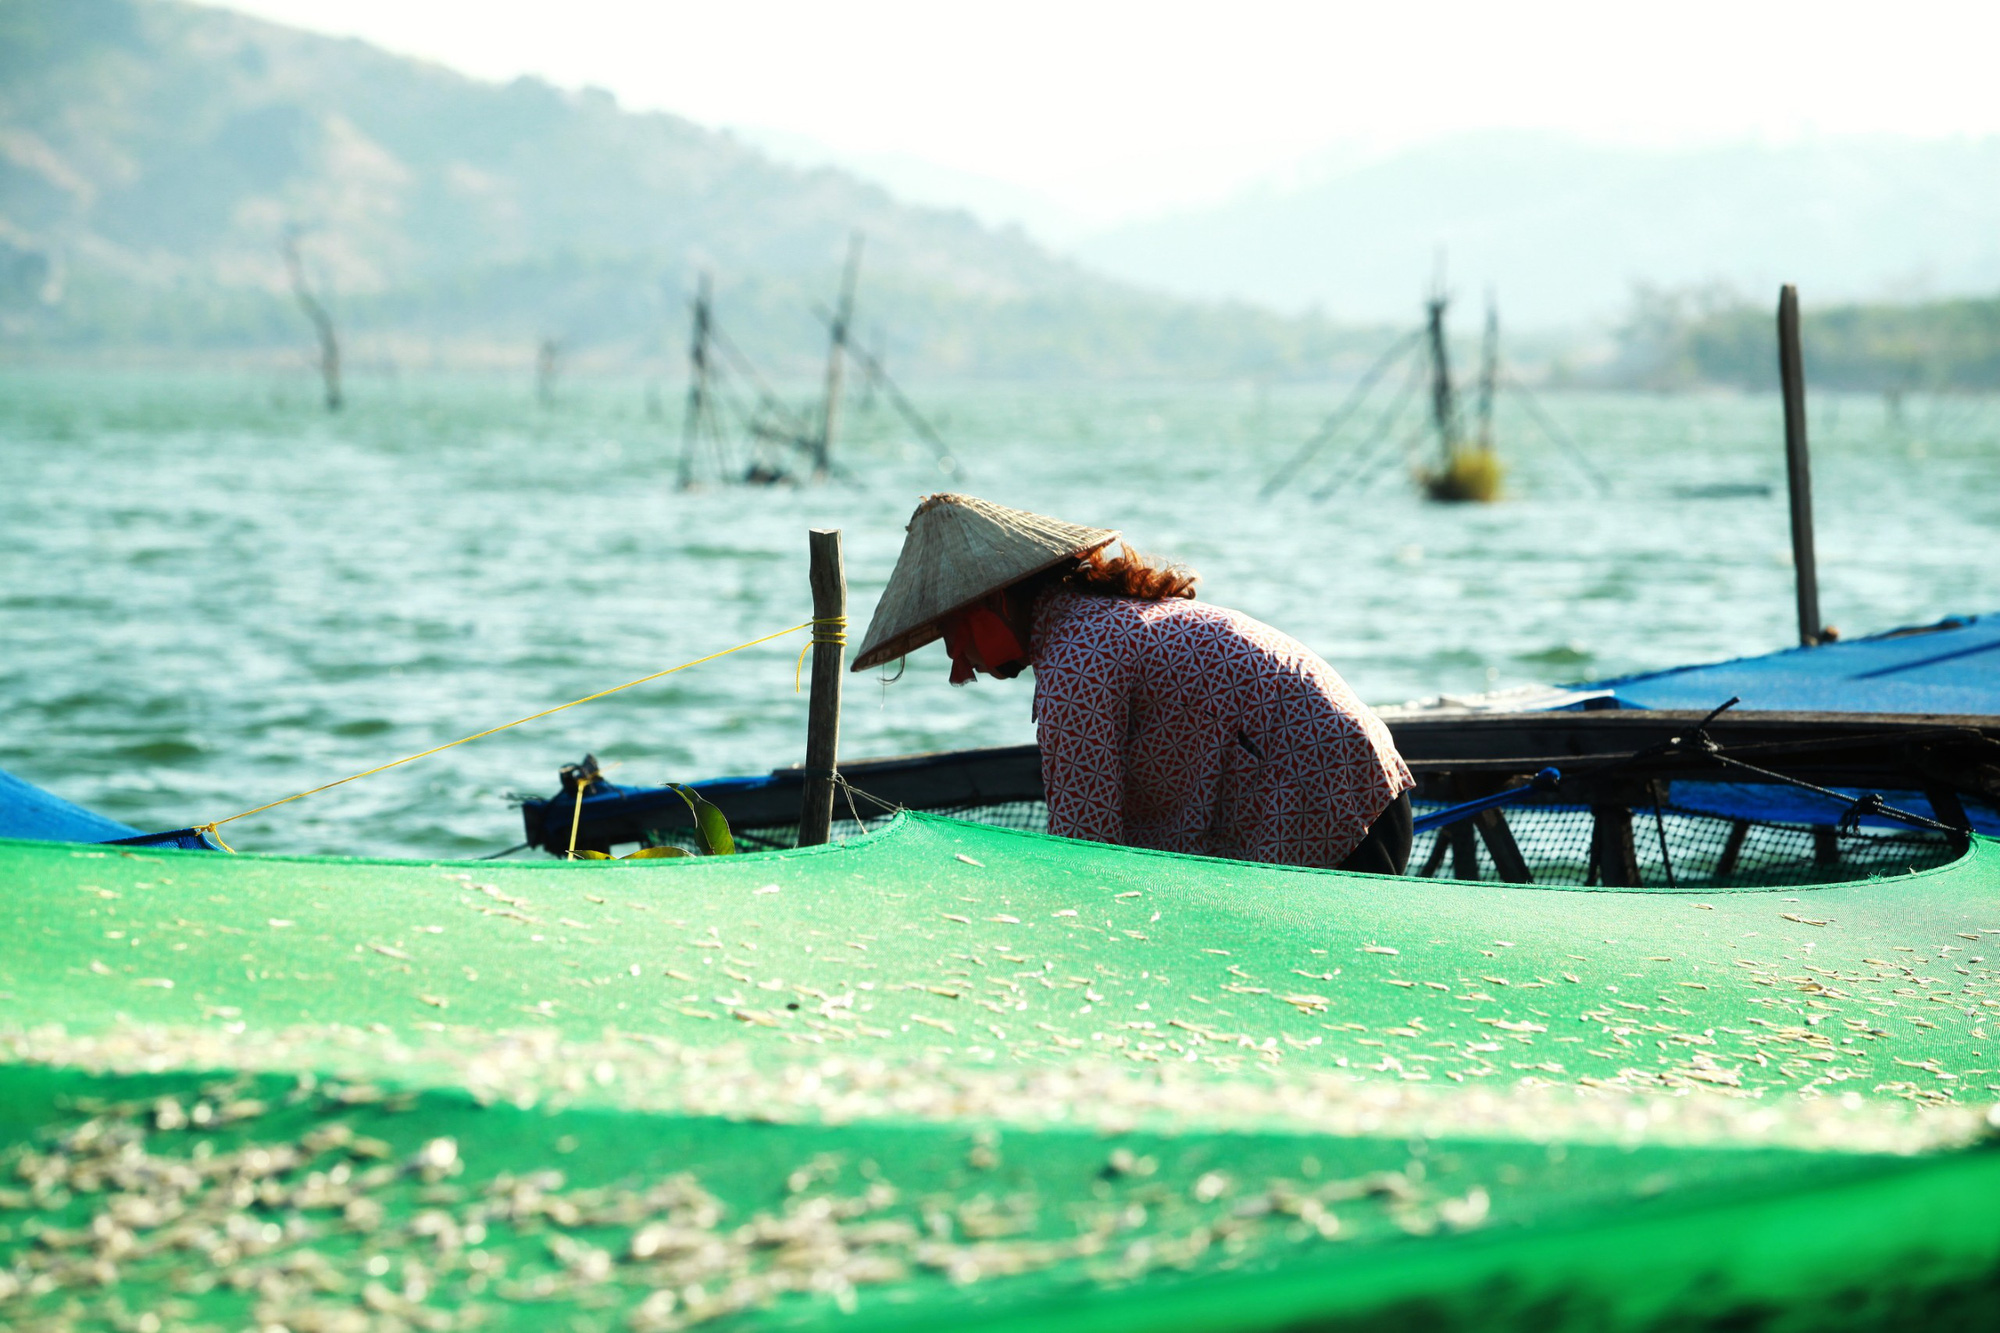 Fresh catch: Check out this off-the-beaten-path fishing village in Vietnam’s Central Highlands